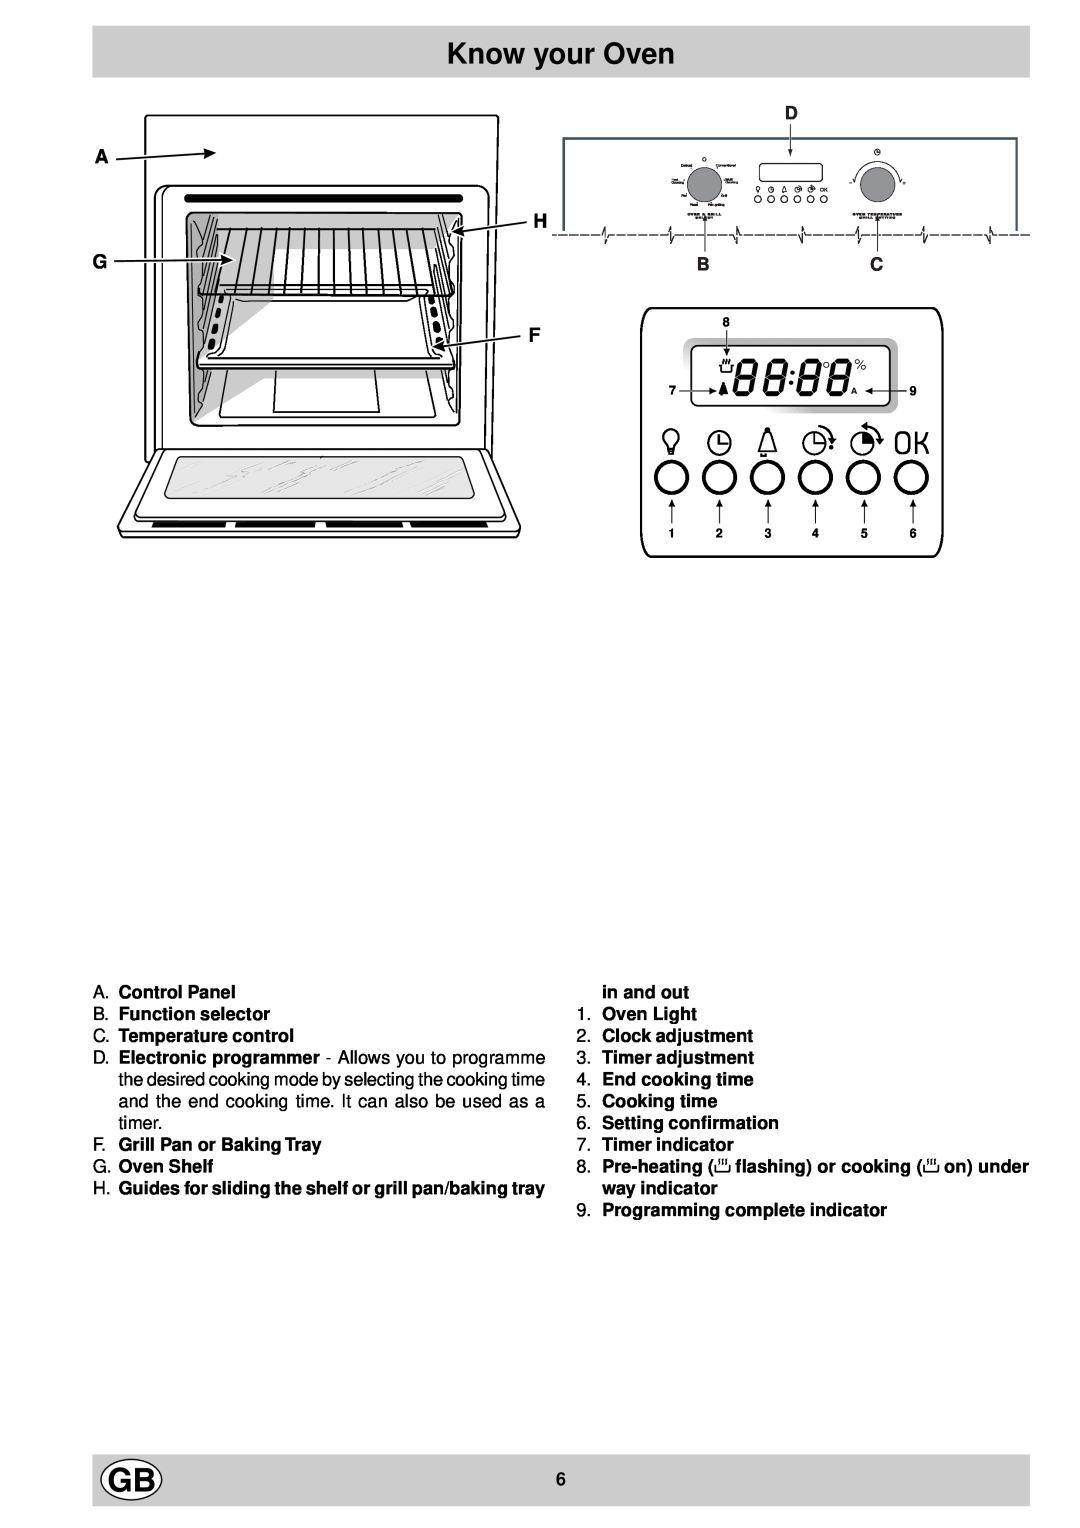 Hotpoint BS63E Know your Oven, A H G F, A. Control Panel B. Function selector C. Temperature control, Timer indicator 